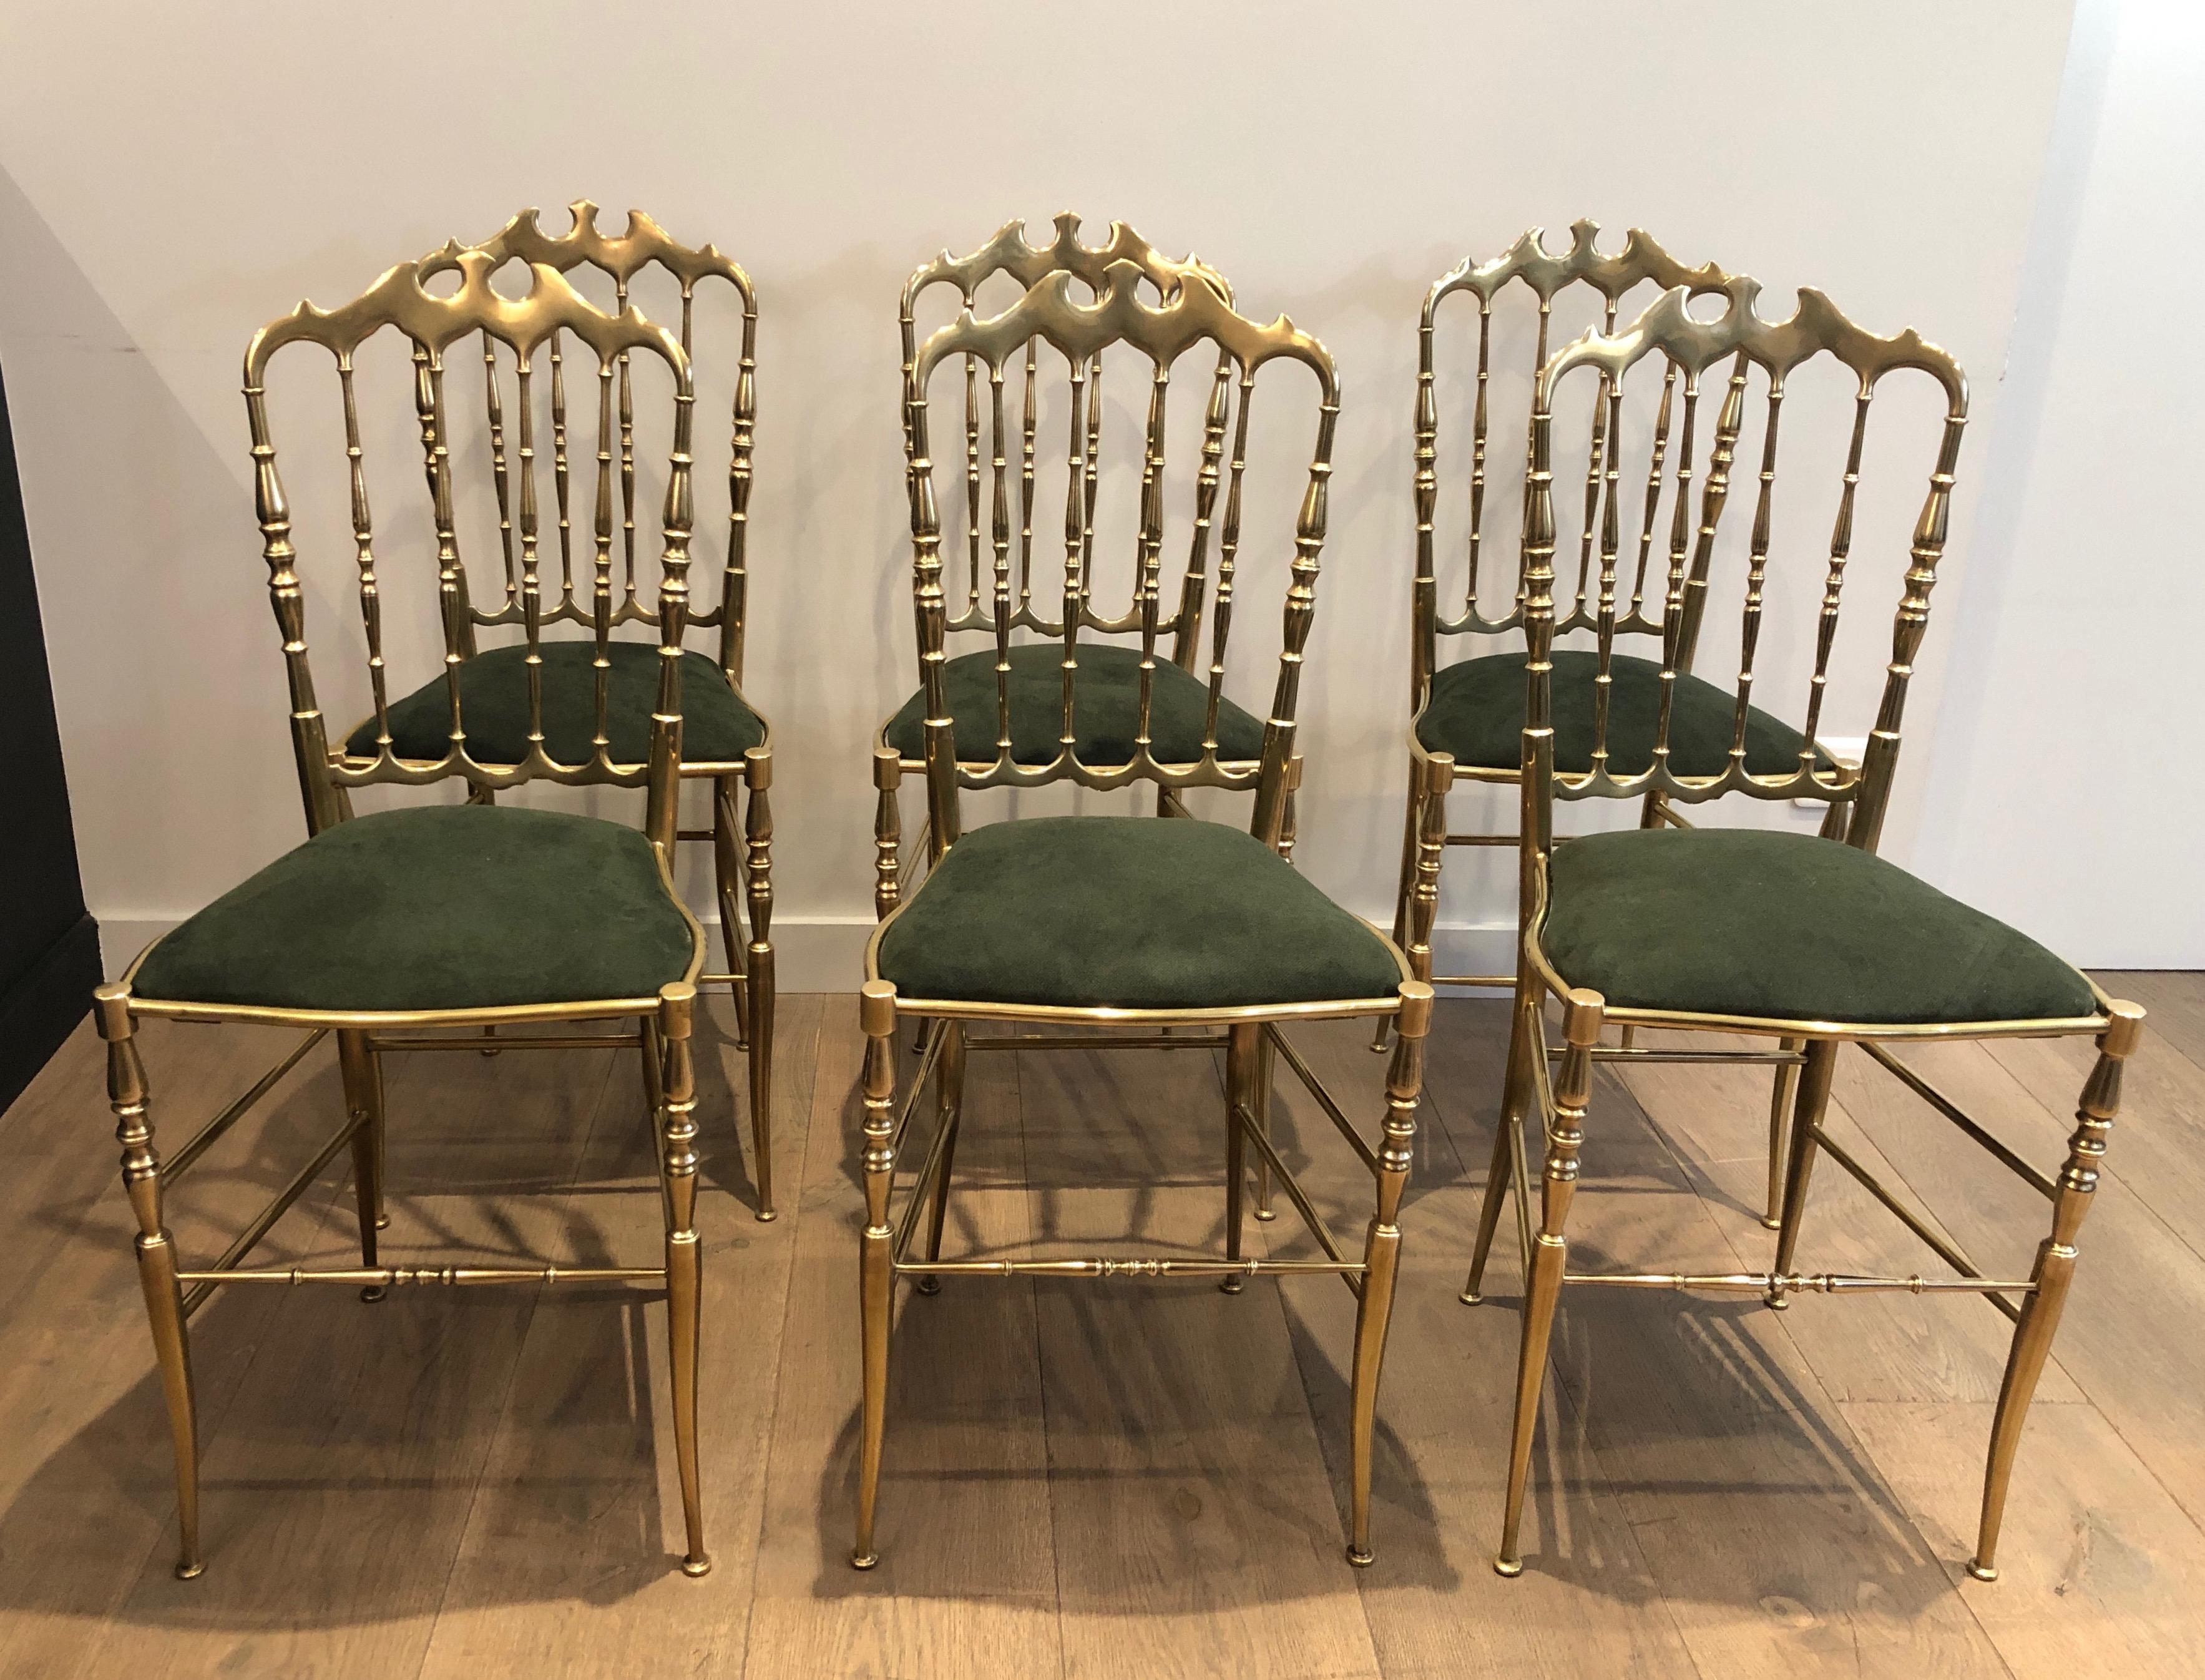 Italian Rare Suite of 6 Beautifully Crafted Brass Chiavari Chairs, Seats Green Covered